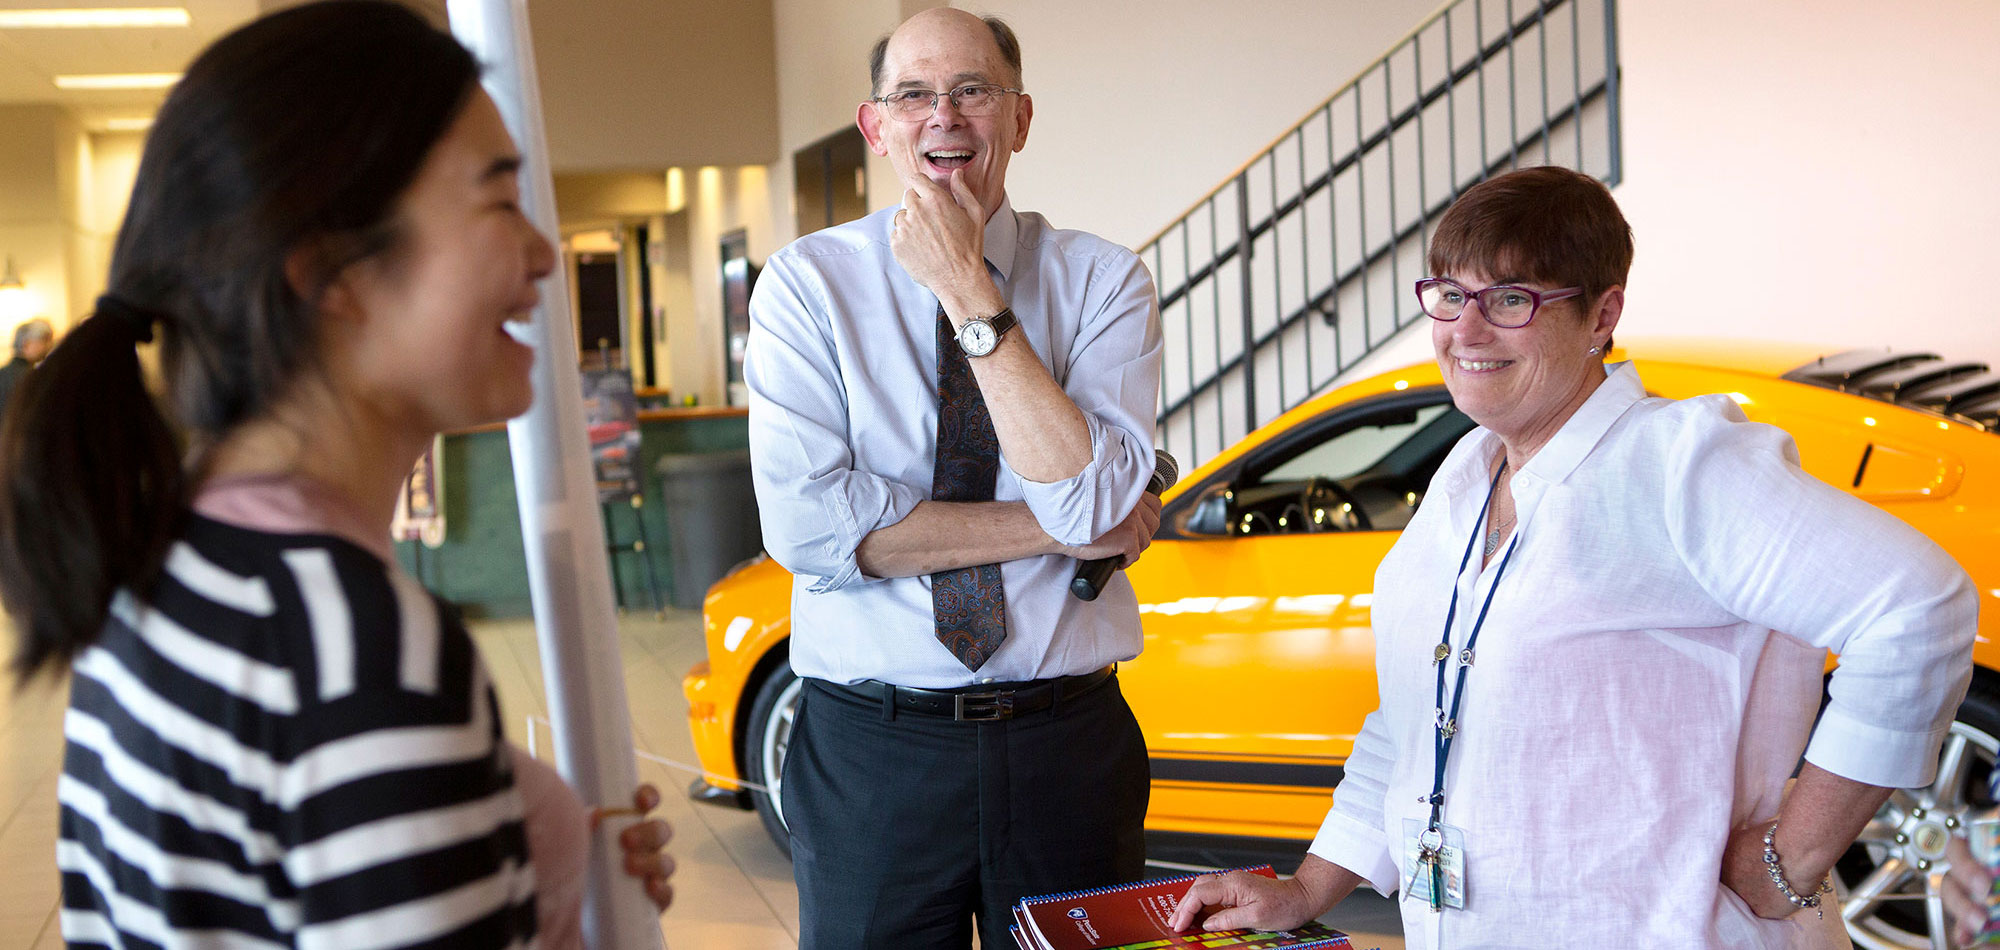 A graduate student is seen laughing with Dr. Charles Lang, Associate Dean for Graduate Education, center, and Kathy Simon, Director of Graduate Education, right, at the 2018 Faculty and Student Research Retreat. The three are pictured standing in front of a car in a museum.